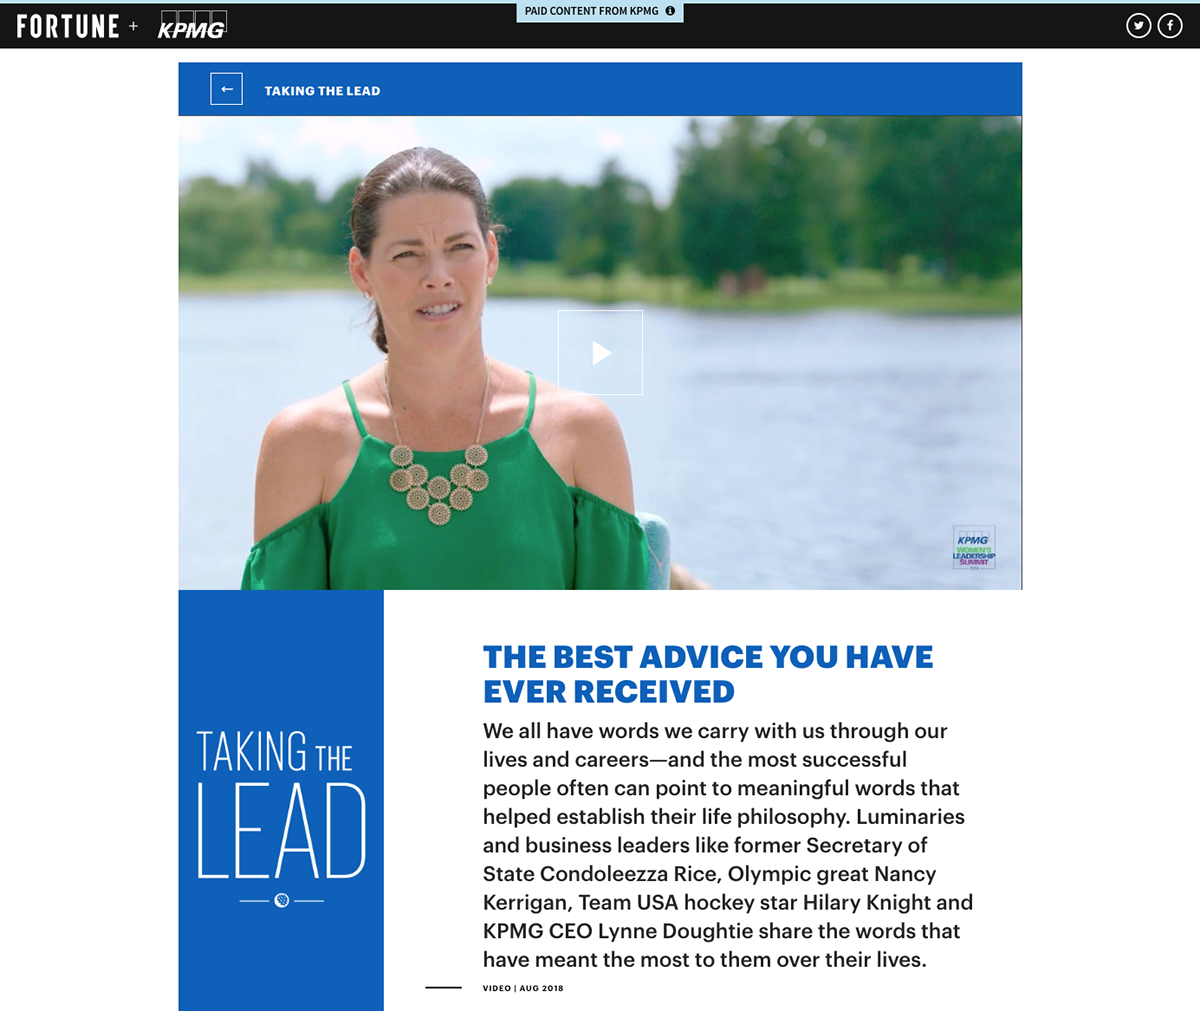 'Taking the Lead' fortune kpmg